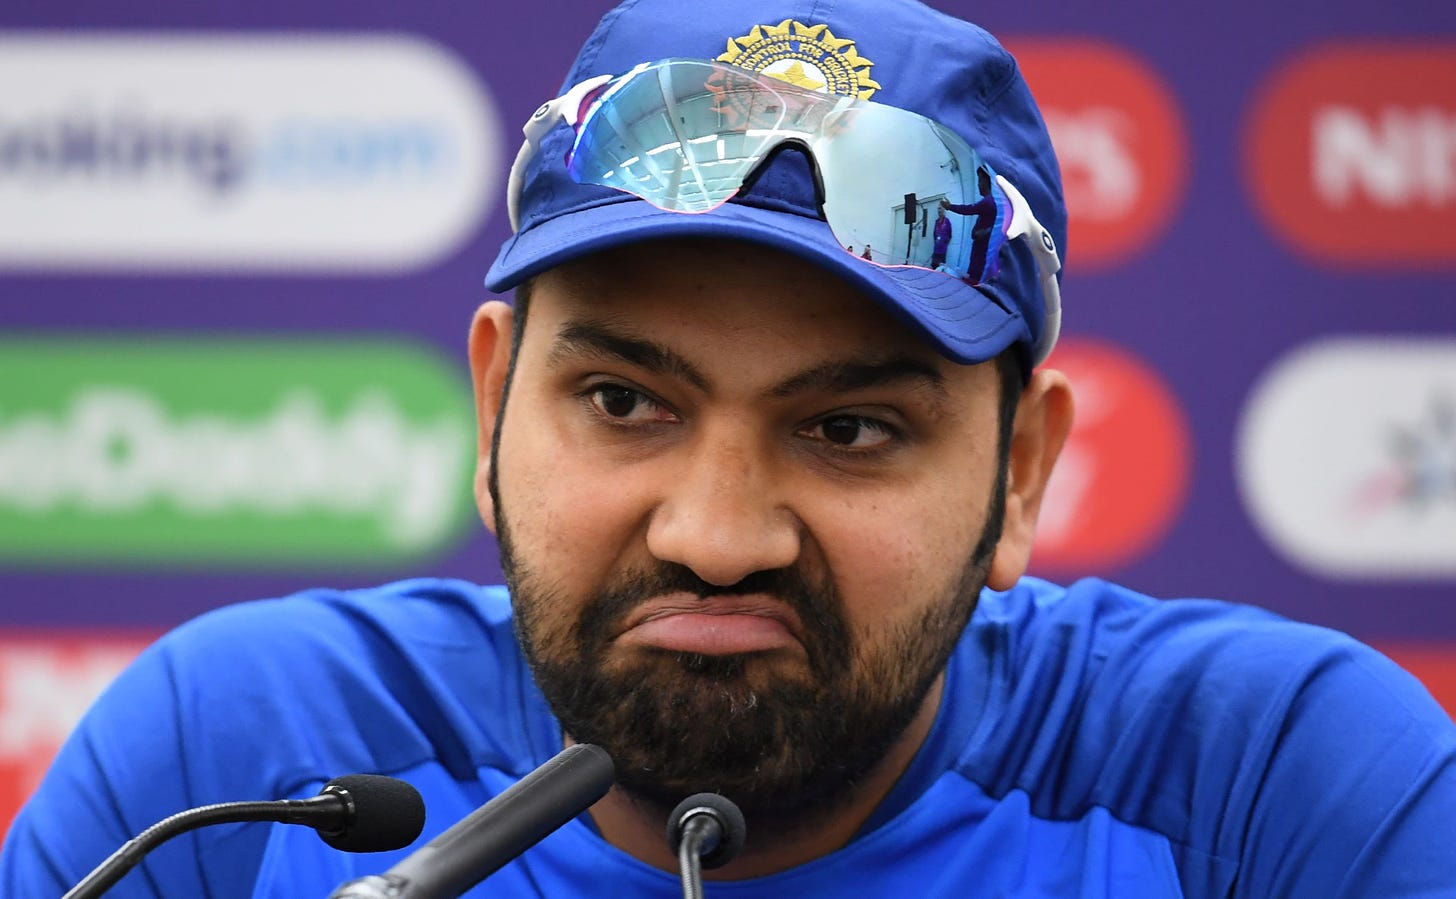 Rohit Sharma Impressed At A Press Conference - Indian Meme Templates